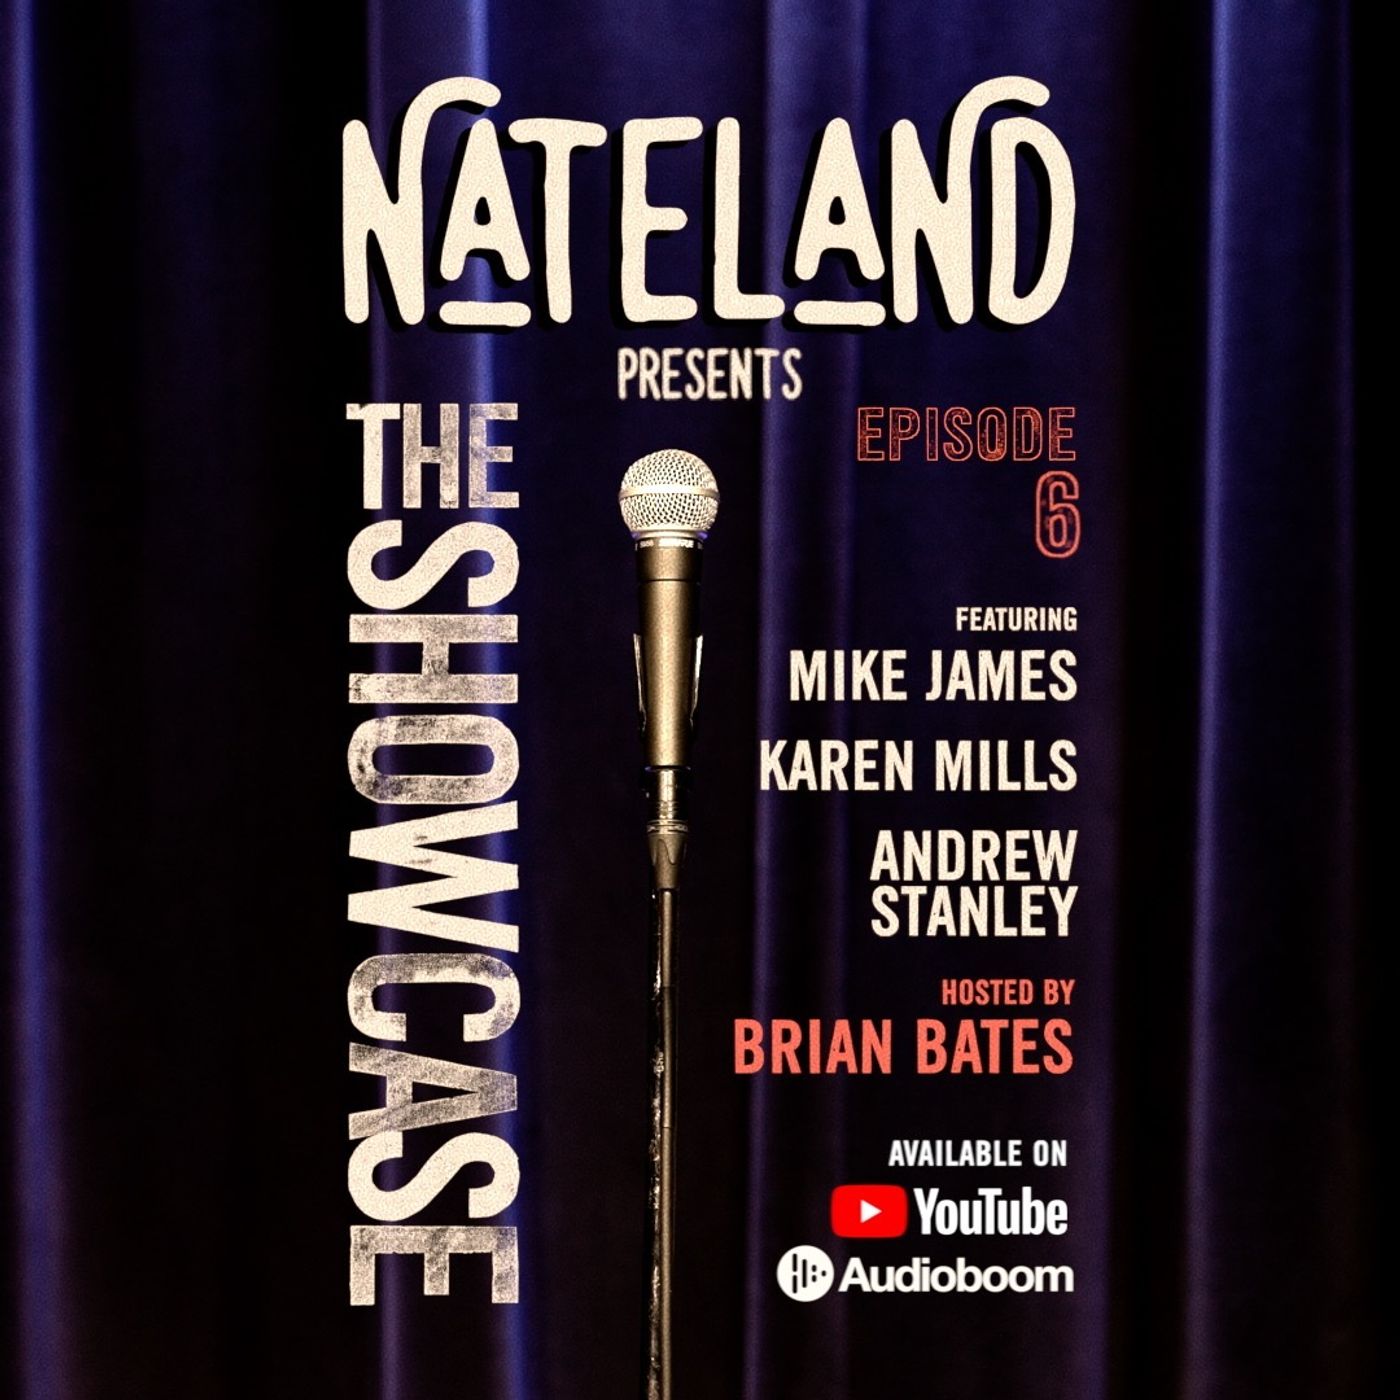 6: Mike James, Karen Mills & Andrew Stanley, Hosted by Brian Bates